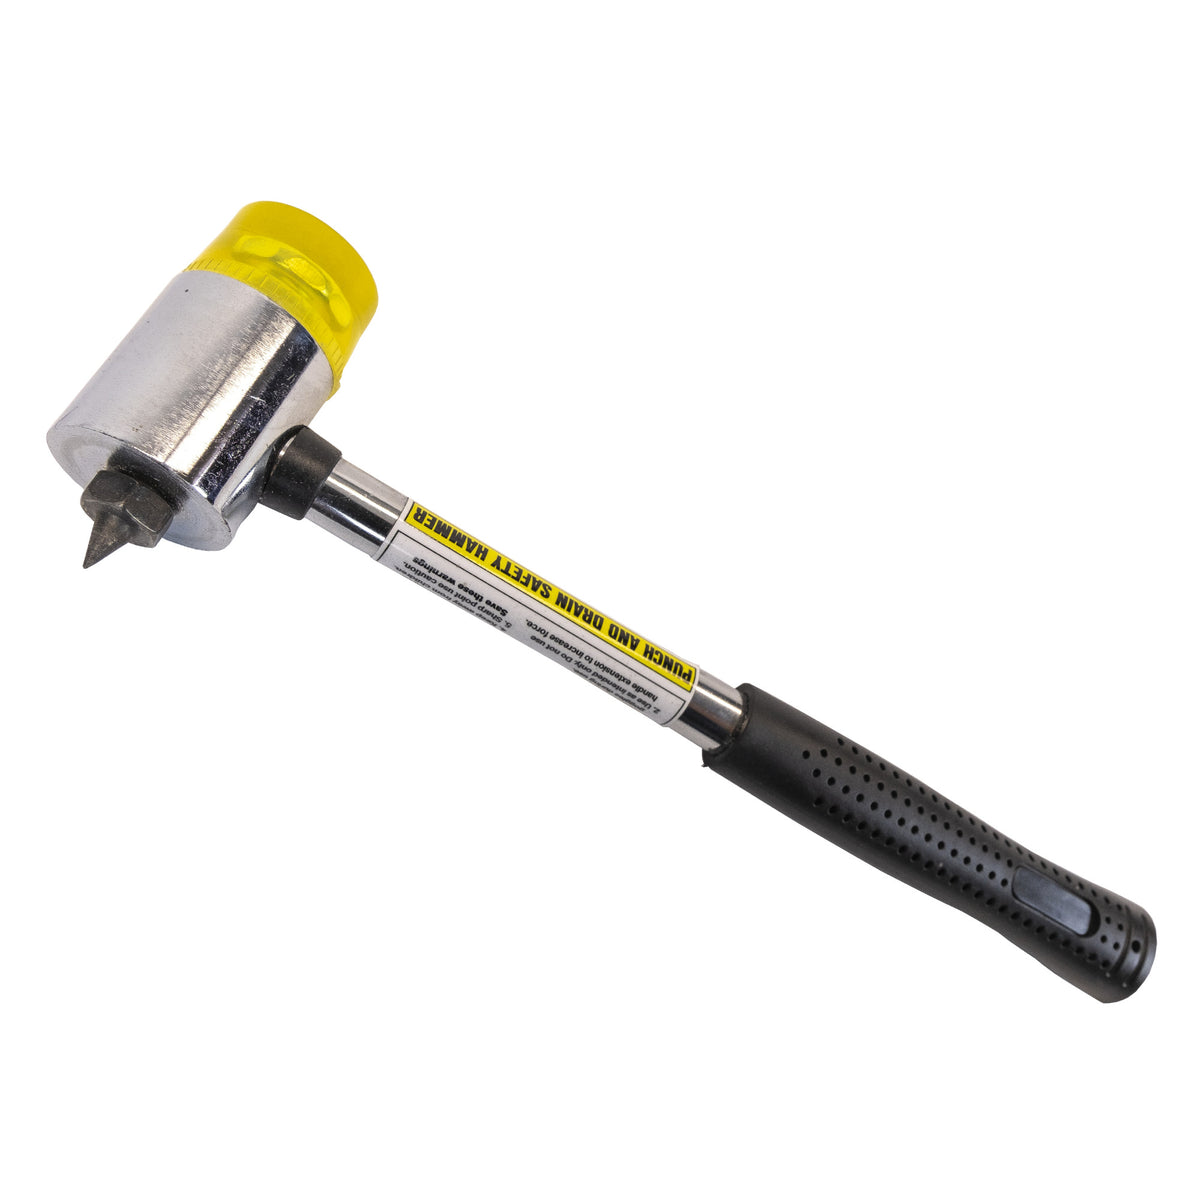 Pro-Tech Punch-n-Drain Hammer for Oil Filters